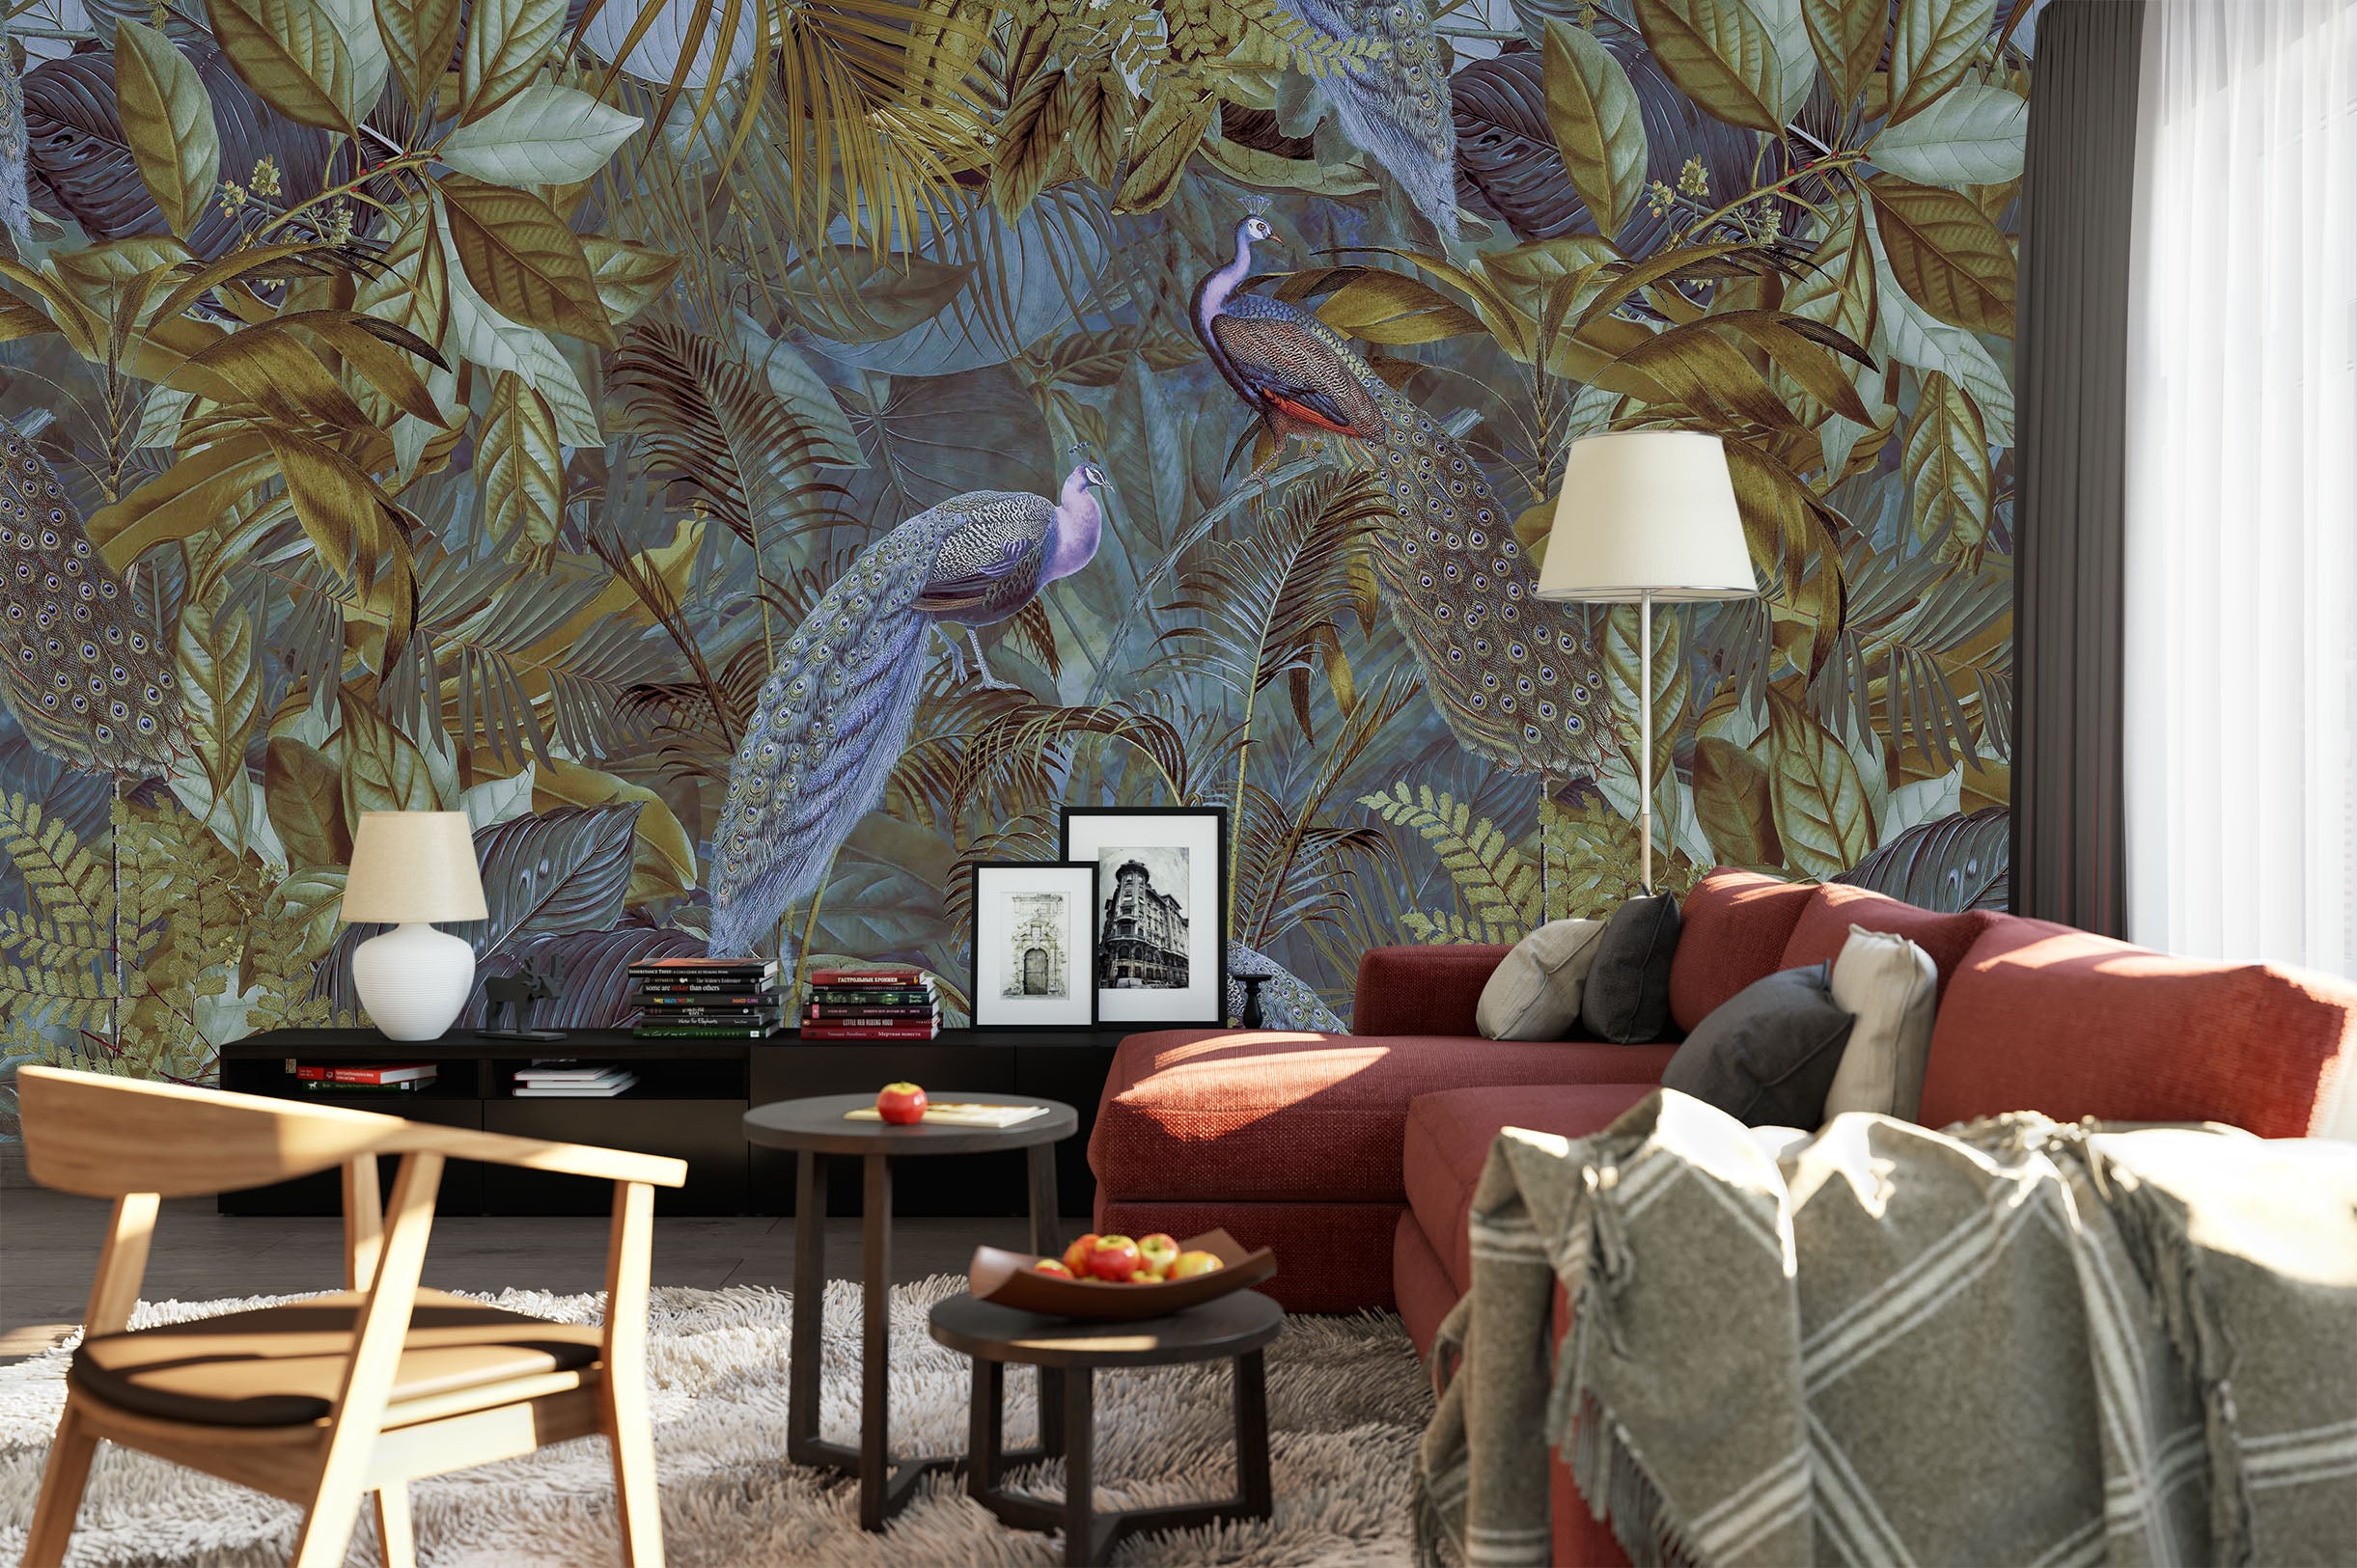 3D Forest Peacock 1011 Andrea haase Wall Mural Wall Murals